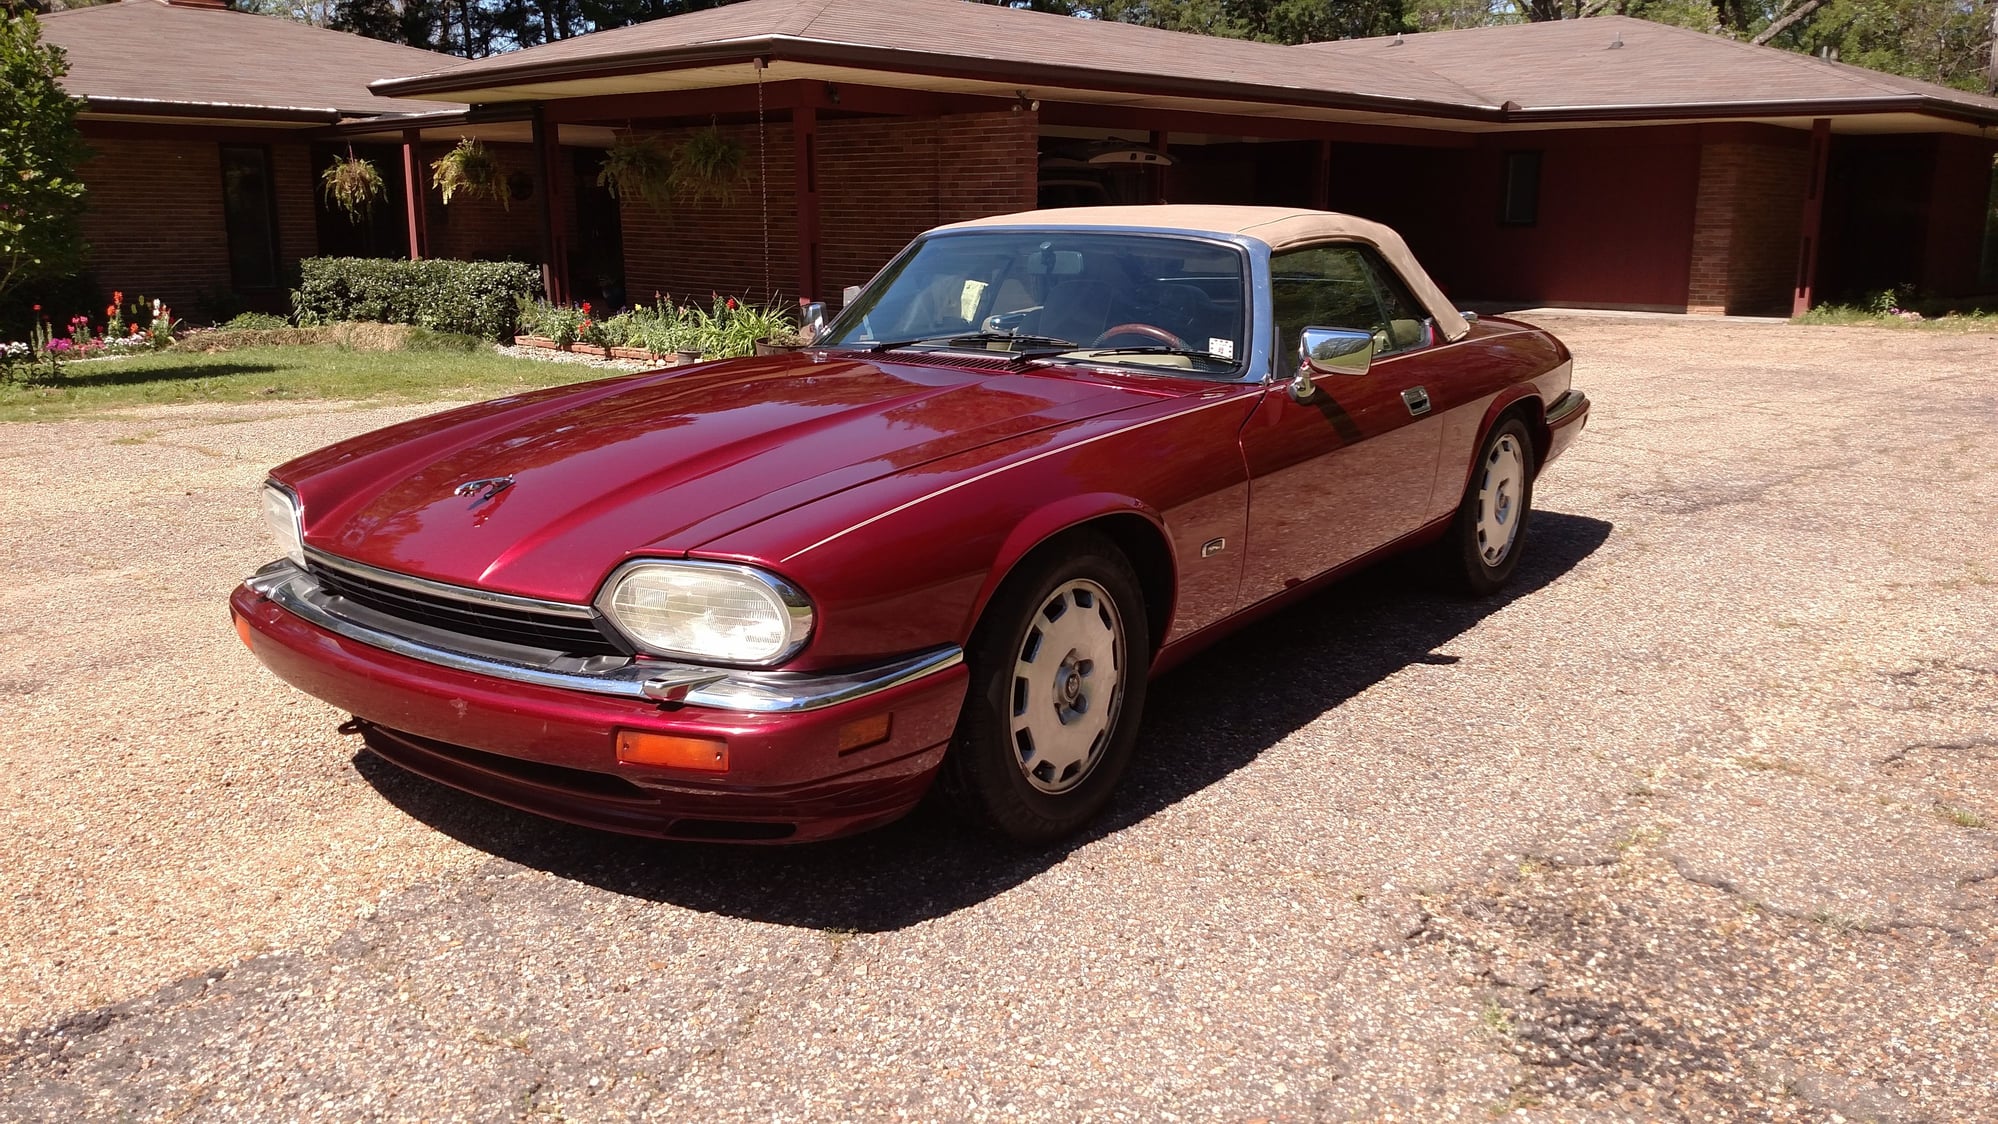 1996 Jaguar XJS - 1996 XJS Convertible - Used - VIN SAJNX274XTC224533 - 103,000 Miles - 6 cyl - 2WD - Automatic - Convertible - Red - Natchez, MS 39120, United States